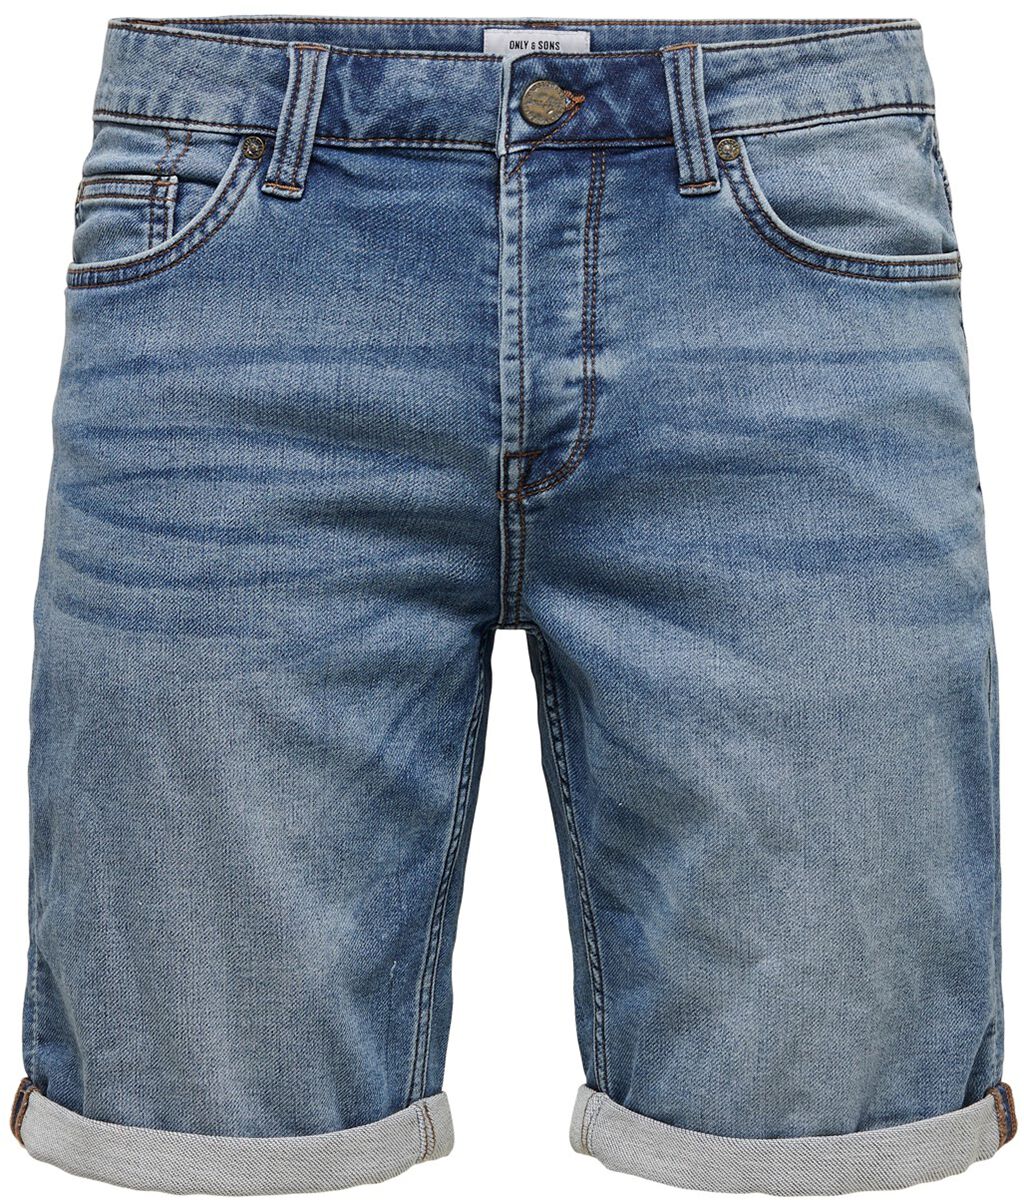 Image of Shorts di ONLY and SONS - Ply Life Blue Shorts - S a XXL - Uomo - blu